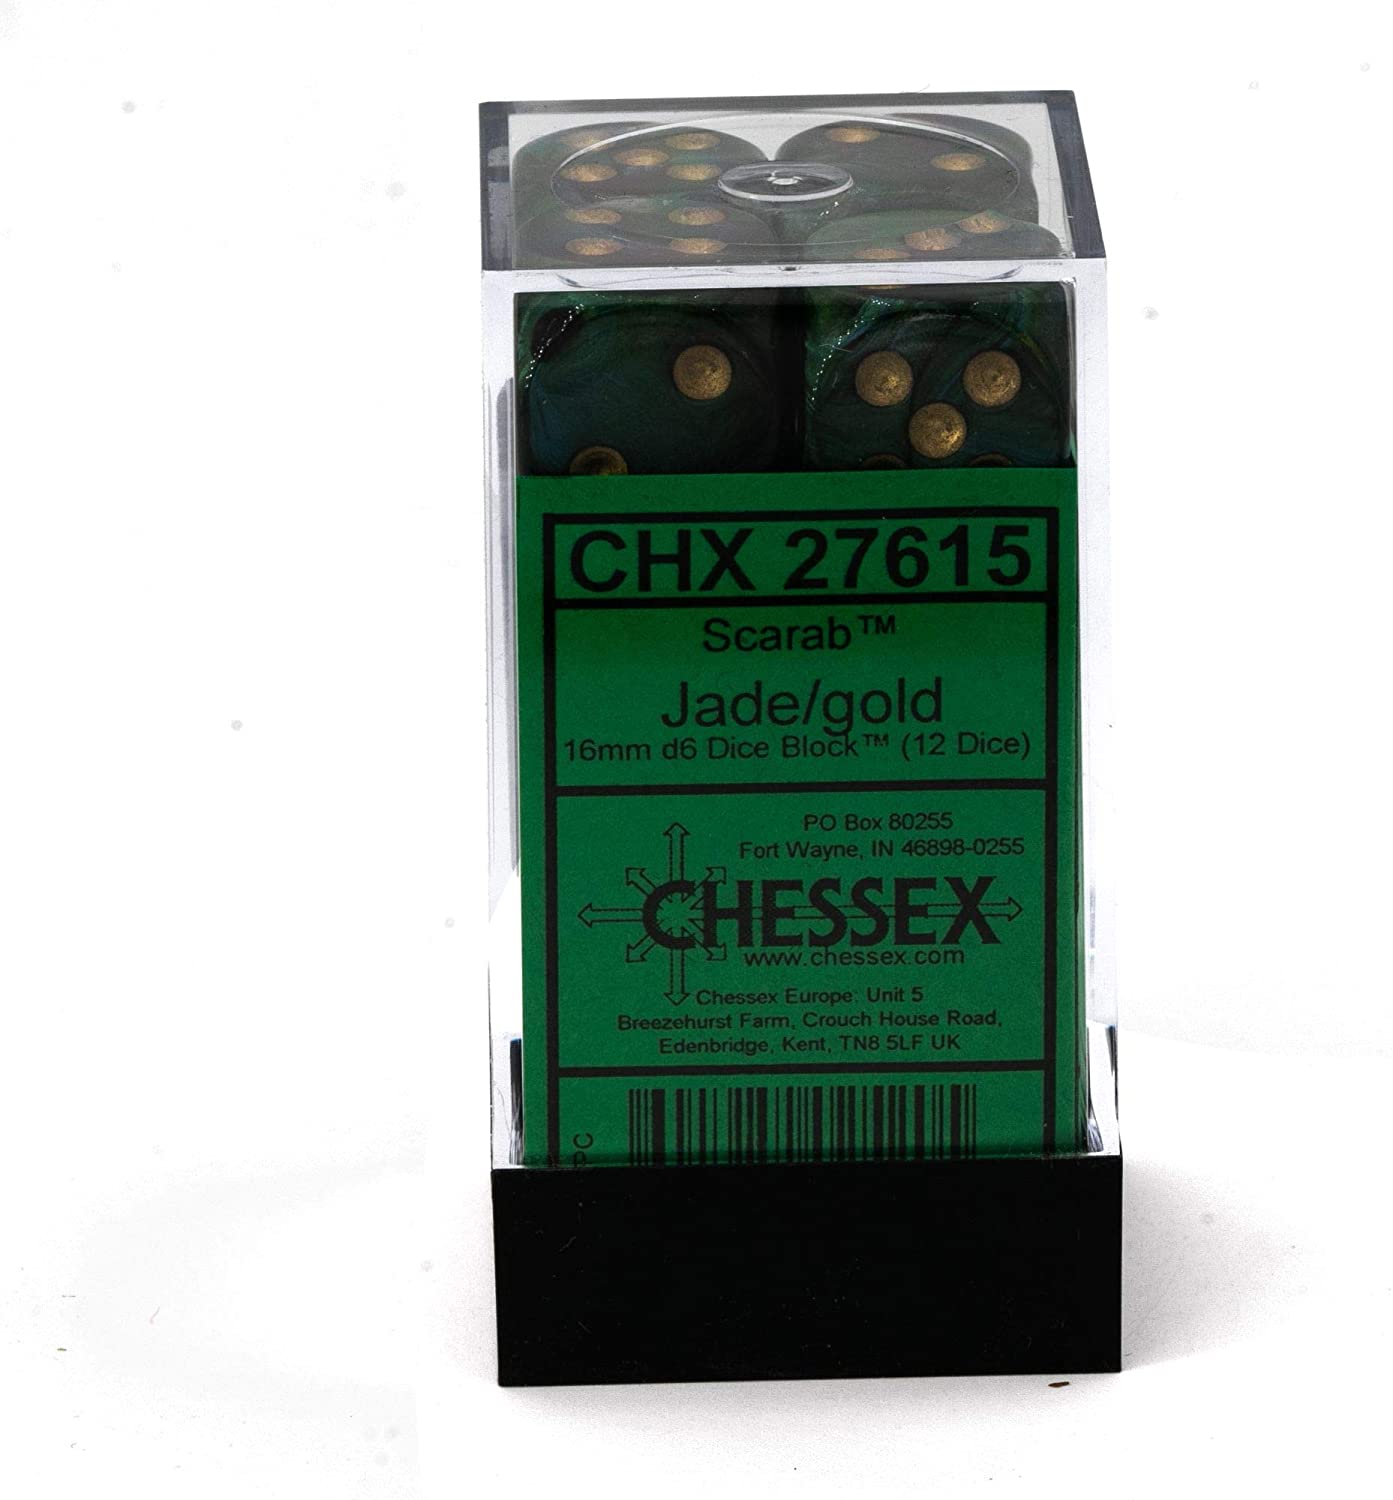 Chessex Dice: D6 Block 16mm - Scarab - Jade with Gold (CHX 27615) - Gamescape